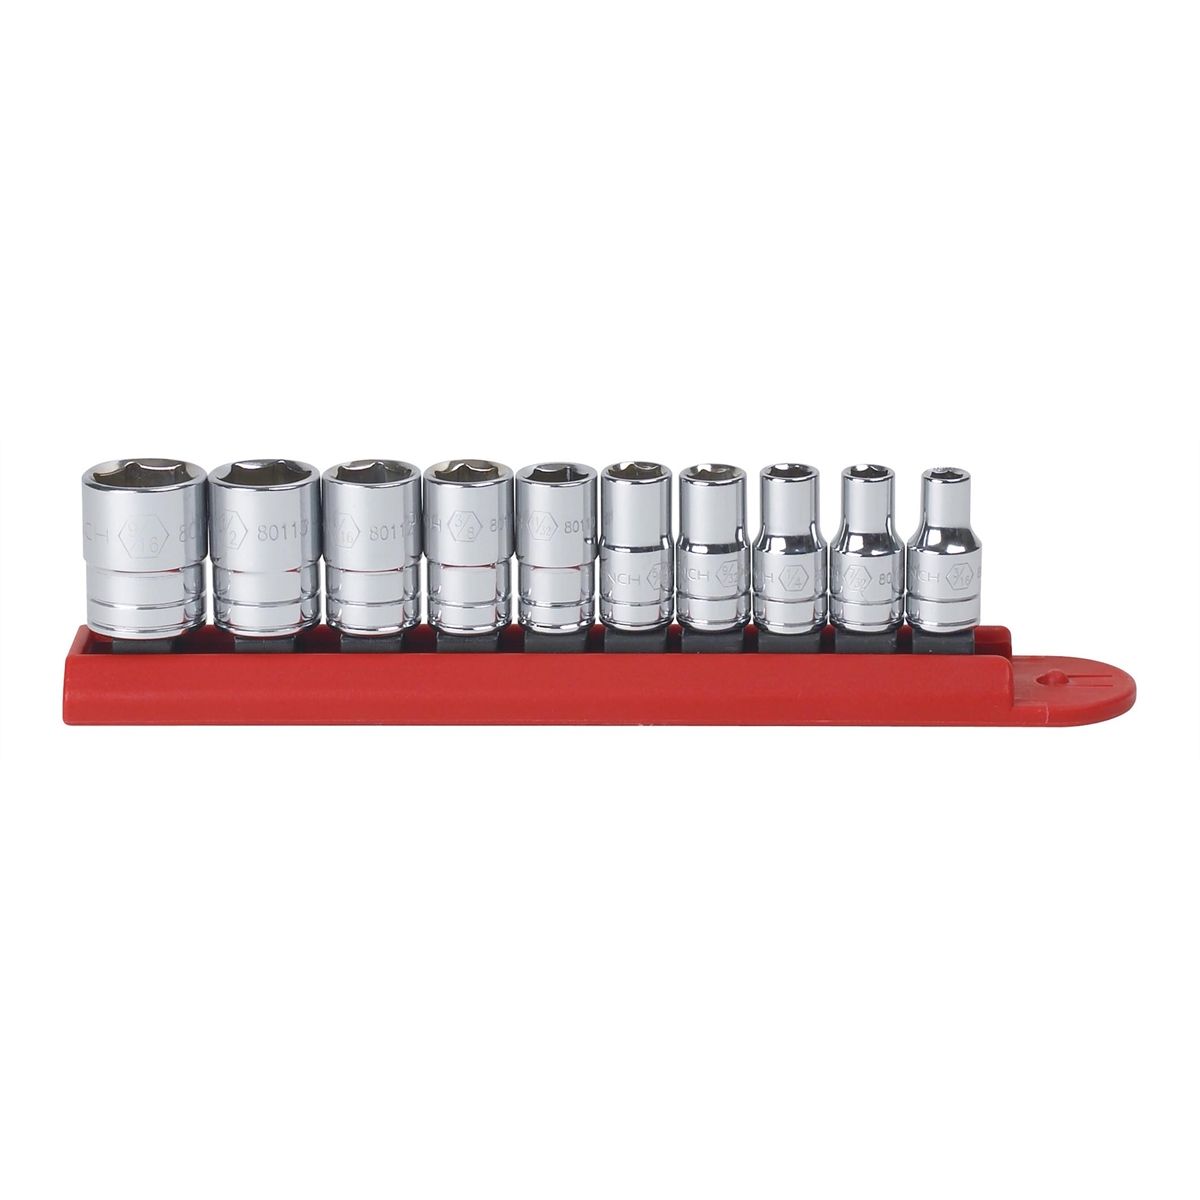 1/4 In Drive 6 Point SAE Socket Set - 10-Pc